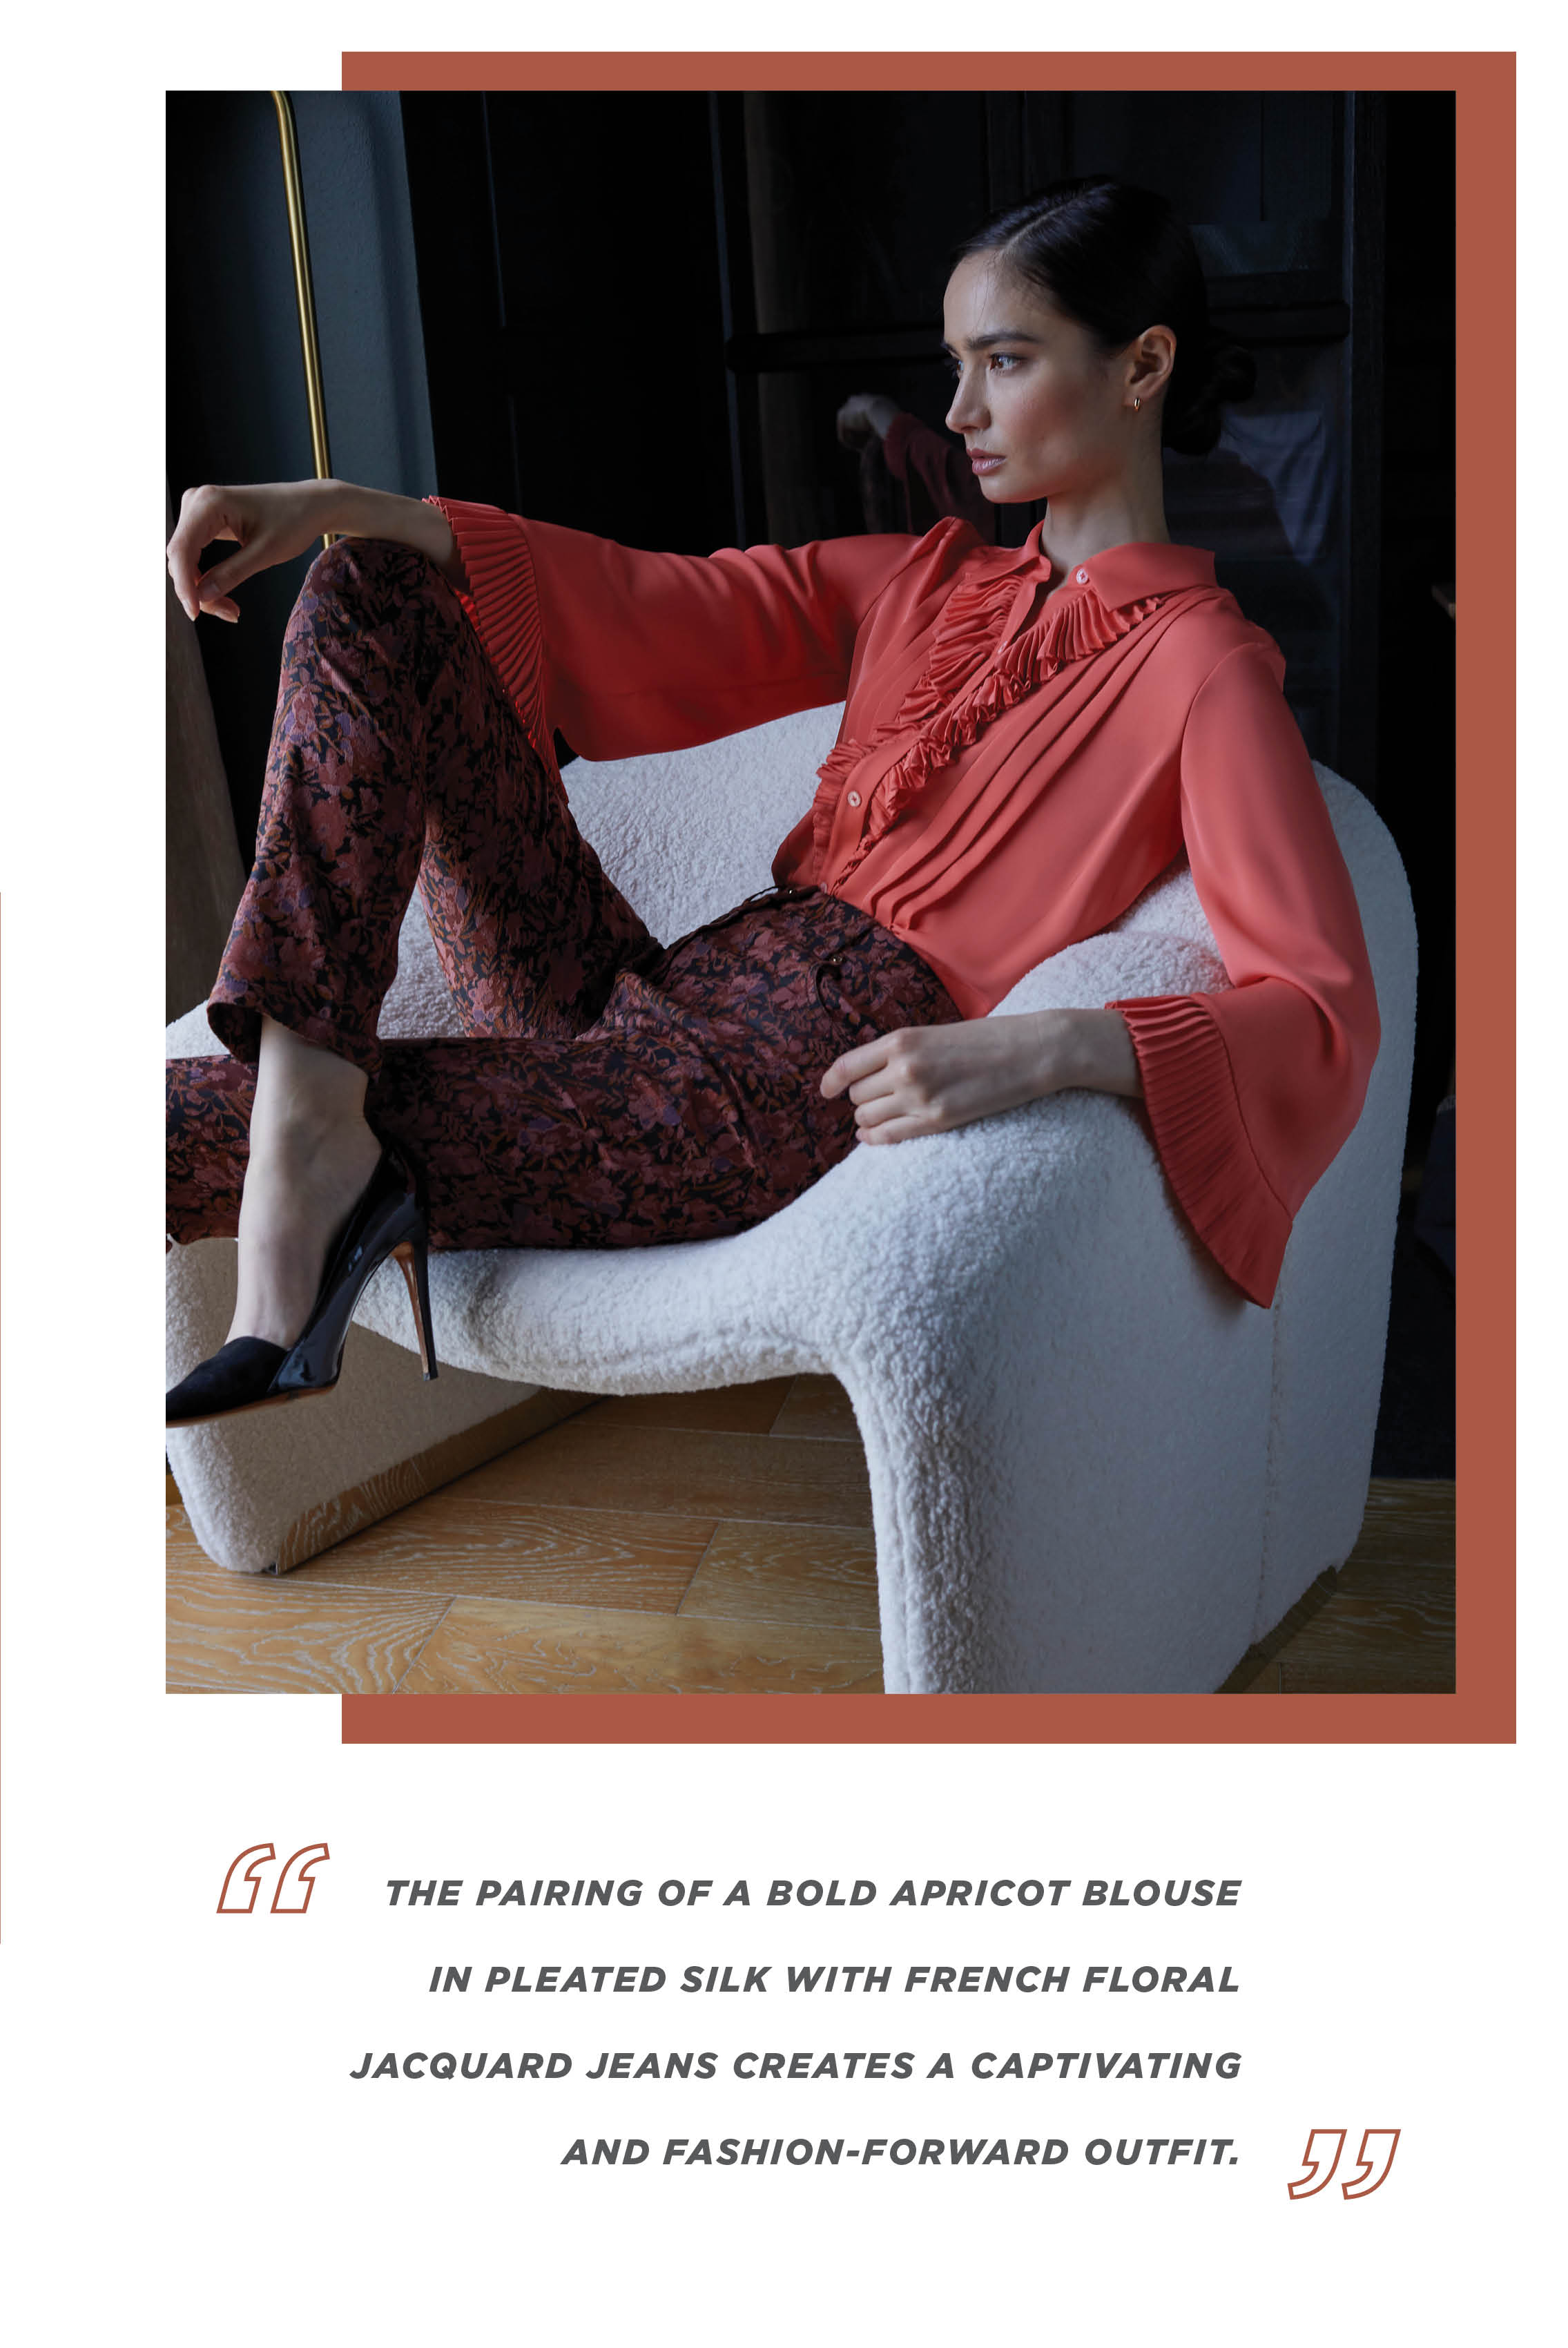 Apricots and roses add a romantic narrative to fall dressing. The pairing of a bold apricot blouse in pleated silk with French floral jacquard jeans creates a captivating and fashion-forward outfit.